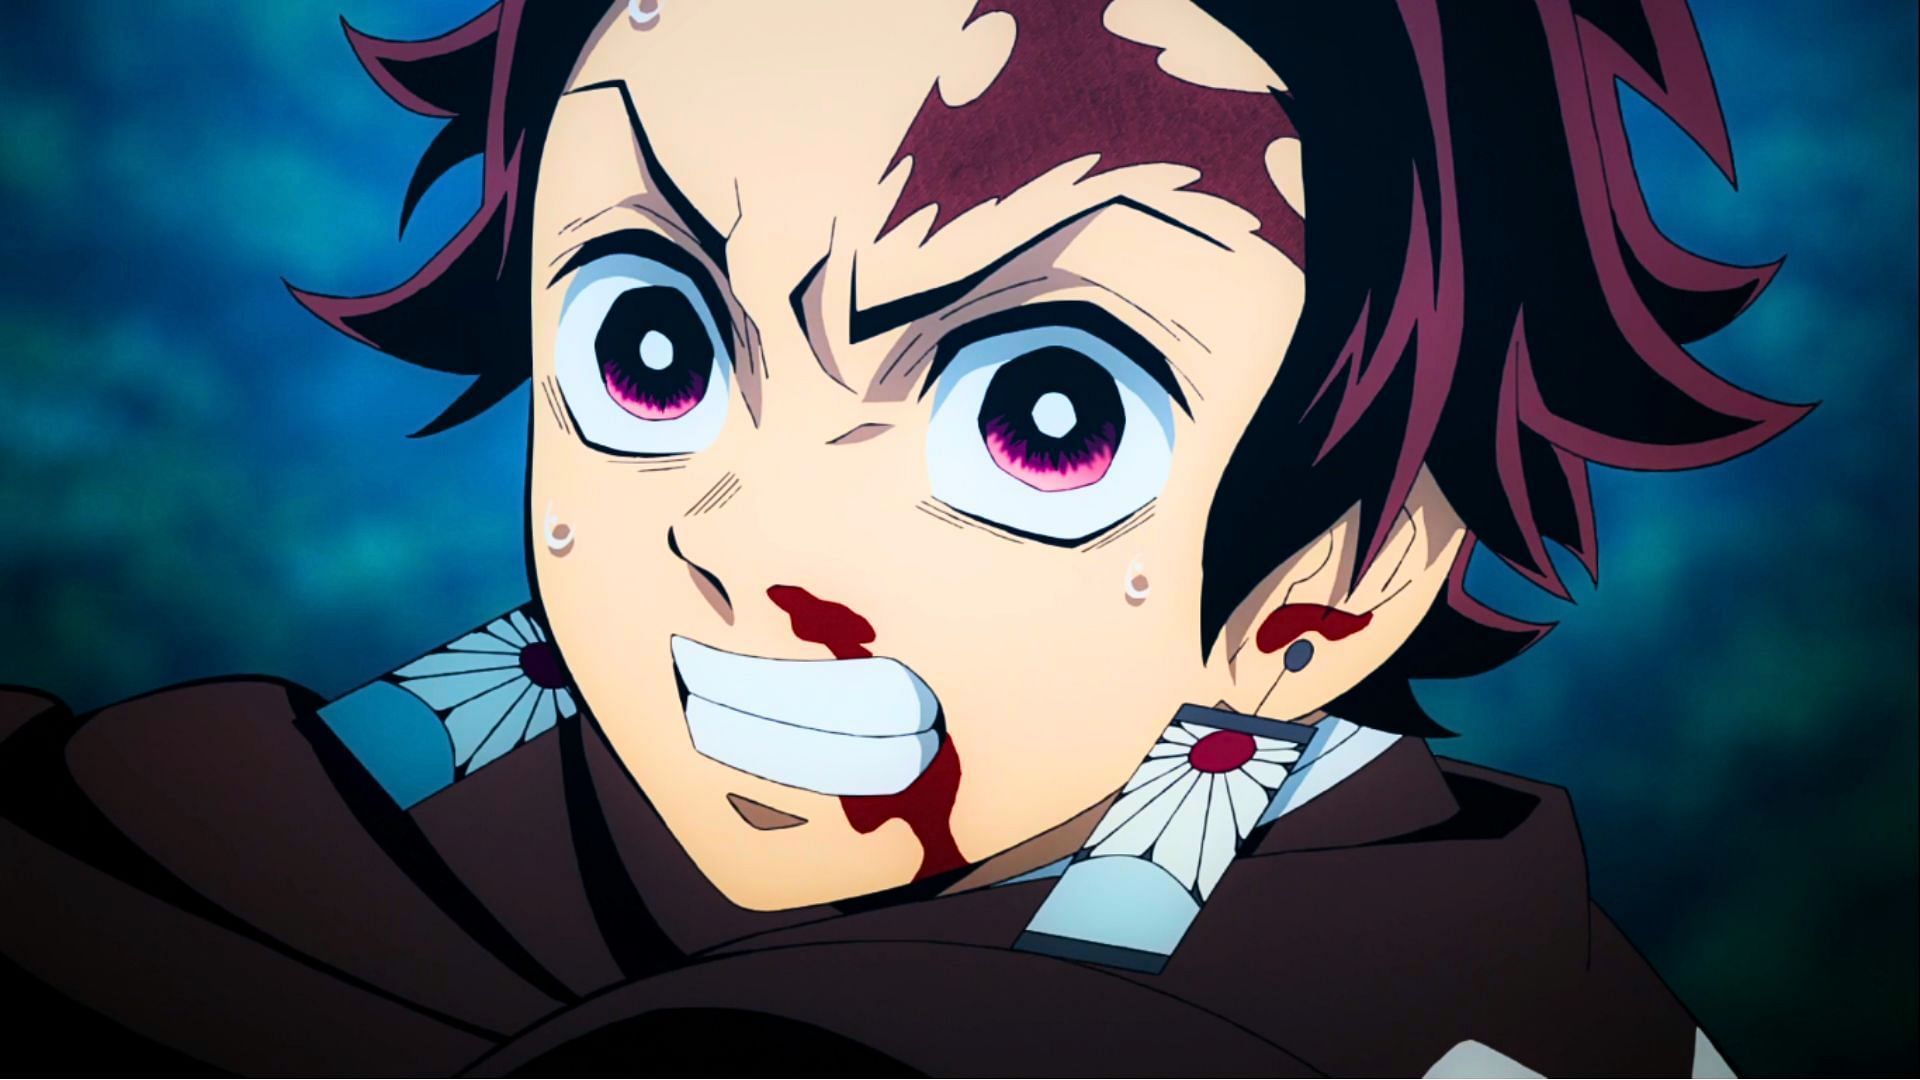 Demon Slayer Season 3 Episode 4 Review - But Why Tho?